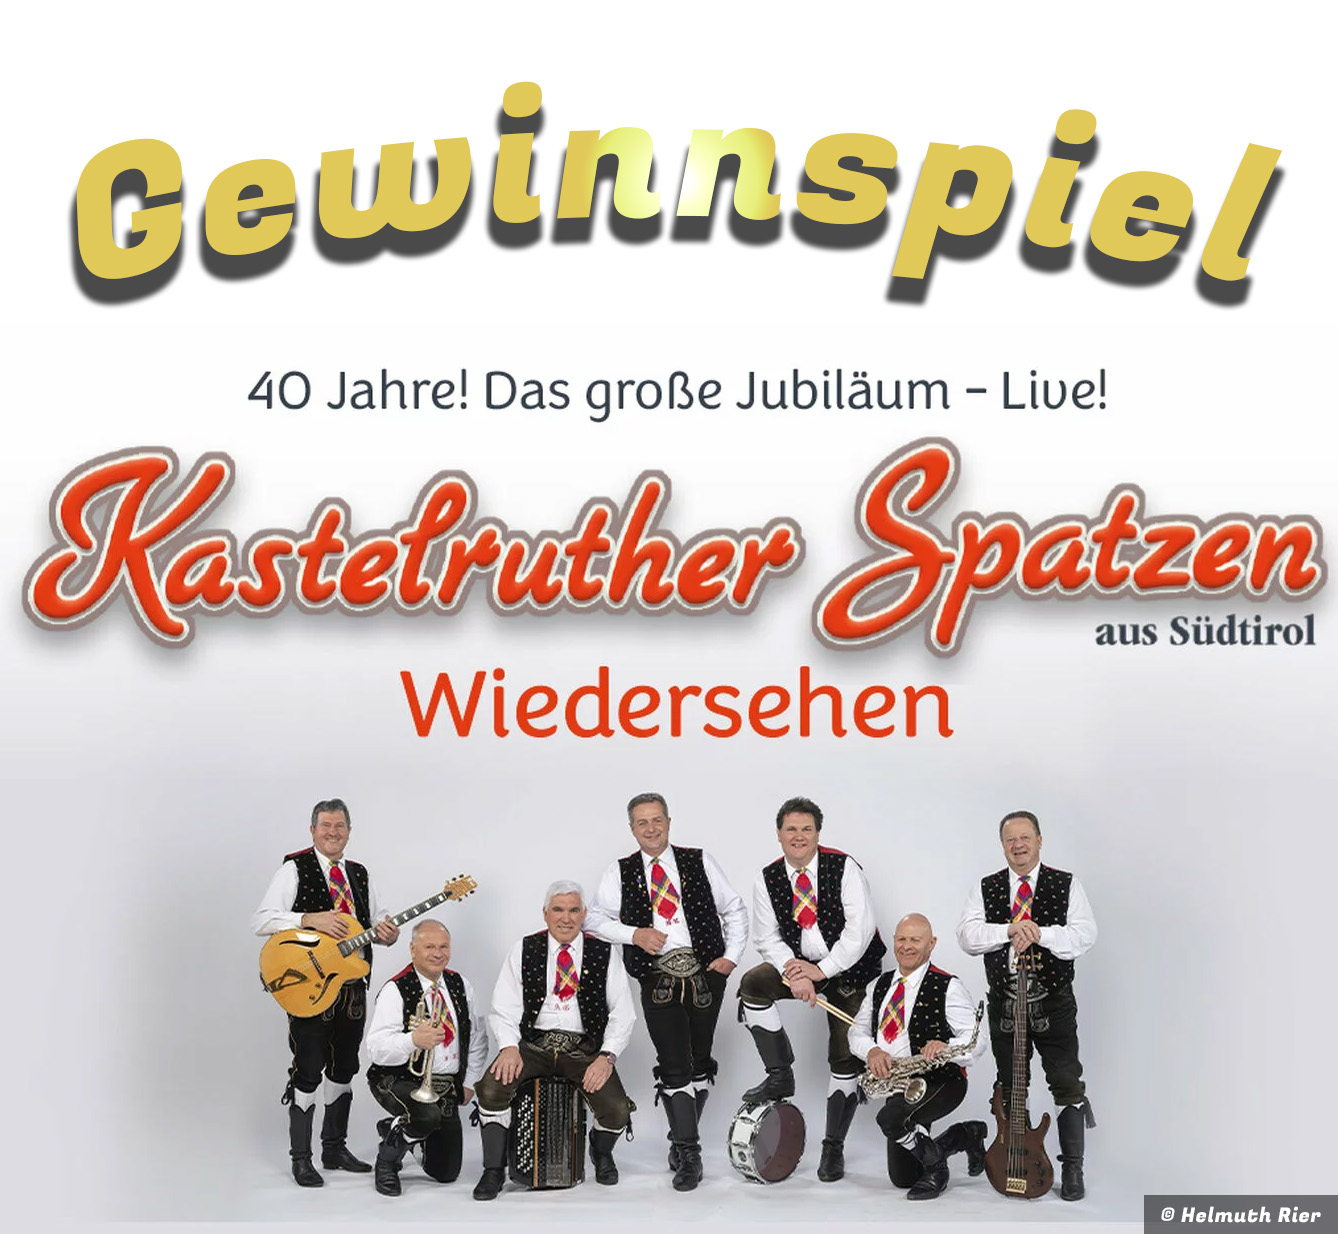 Win 2 x tickets to a concert in Berlin